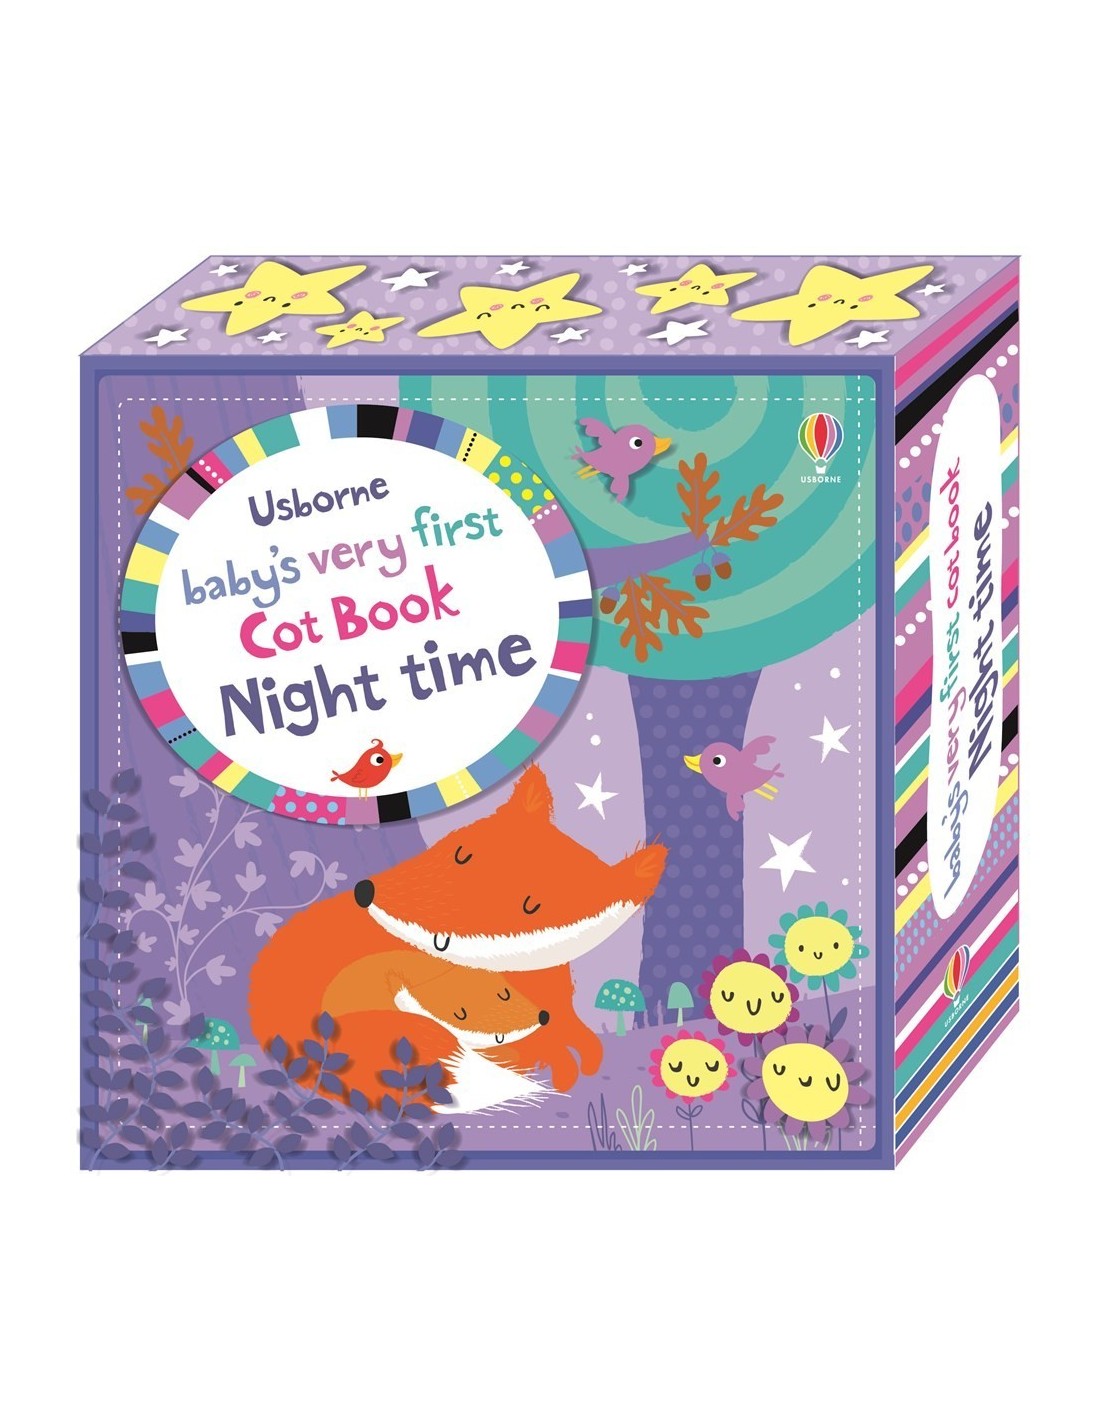 Baby's very first cot book: Night time